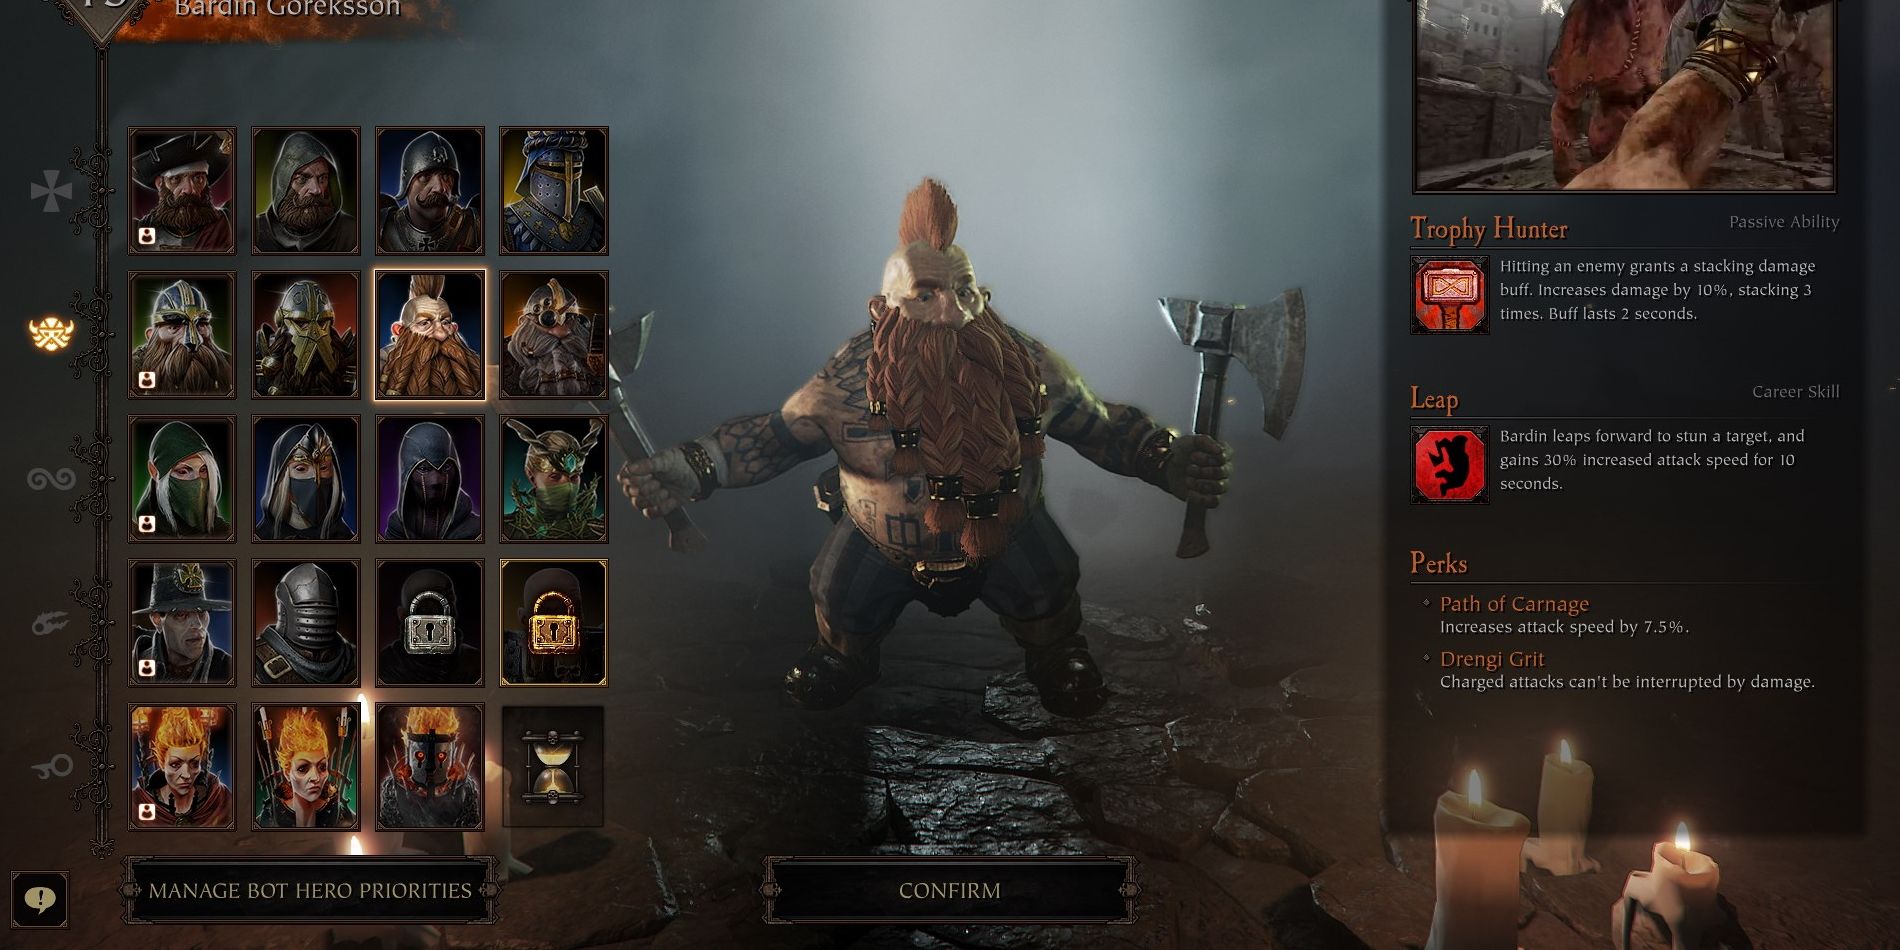 The character select screen in Vermintide 2, with Bardin as a Slayer selected.